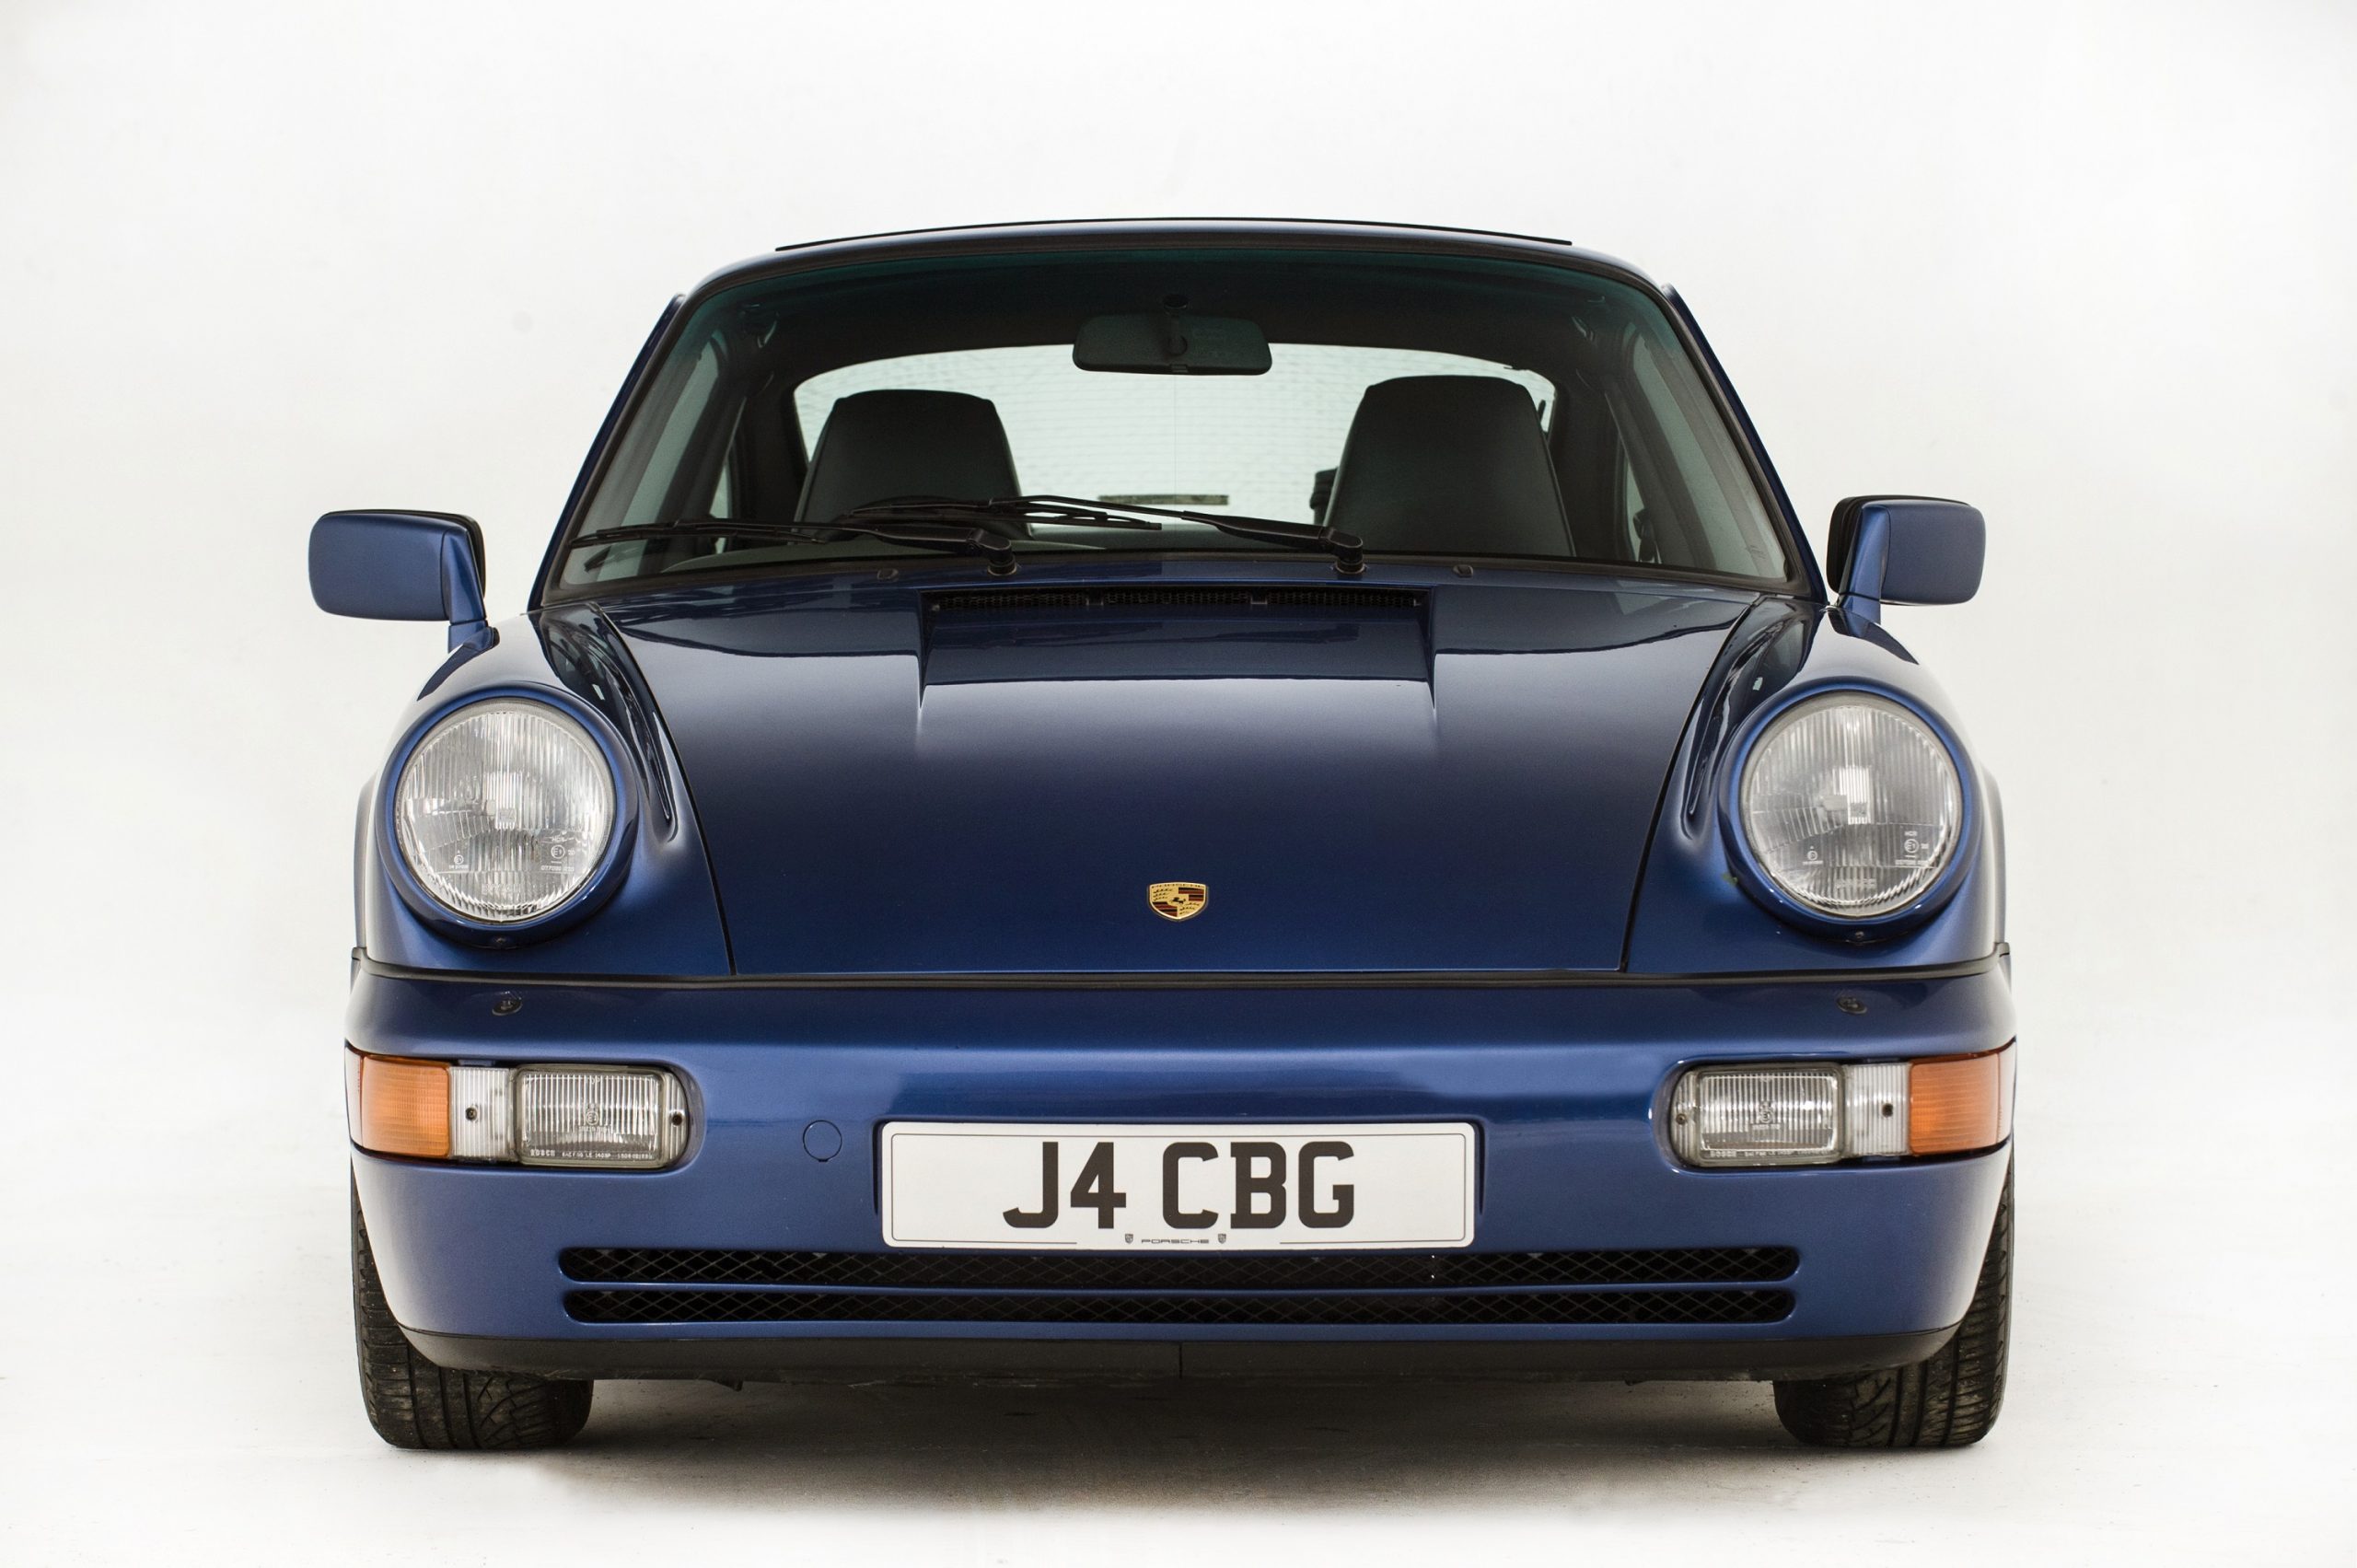 A blue 1991 Porsche 911 shot from the front in a photo studio